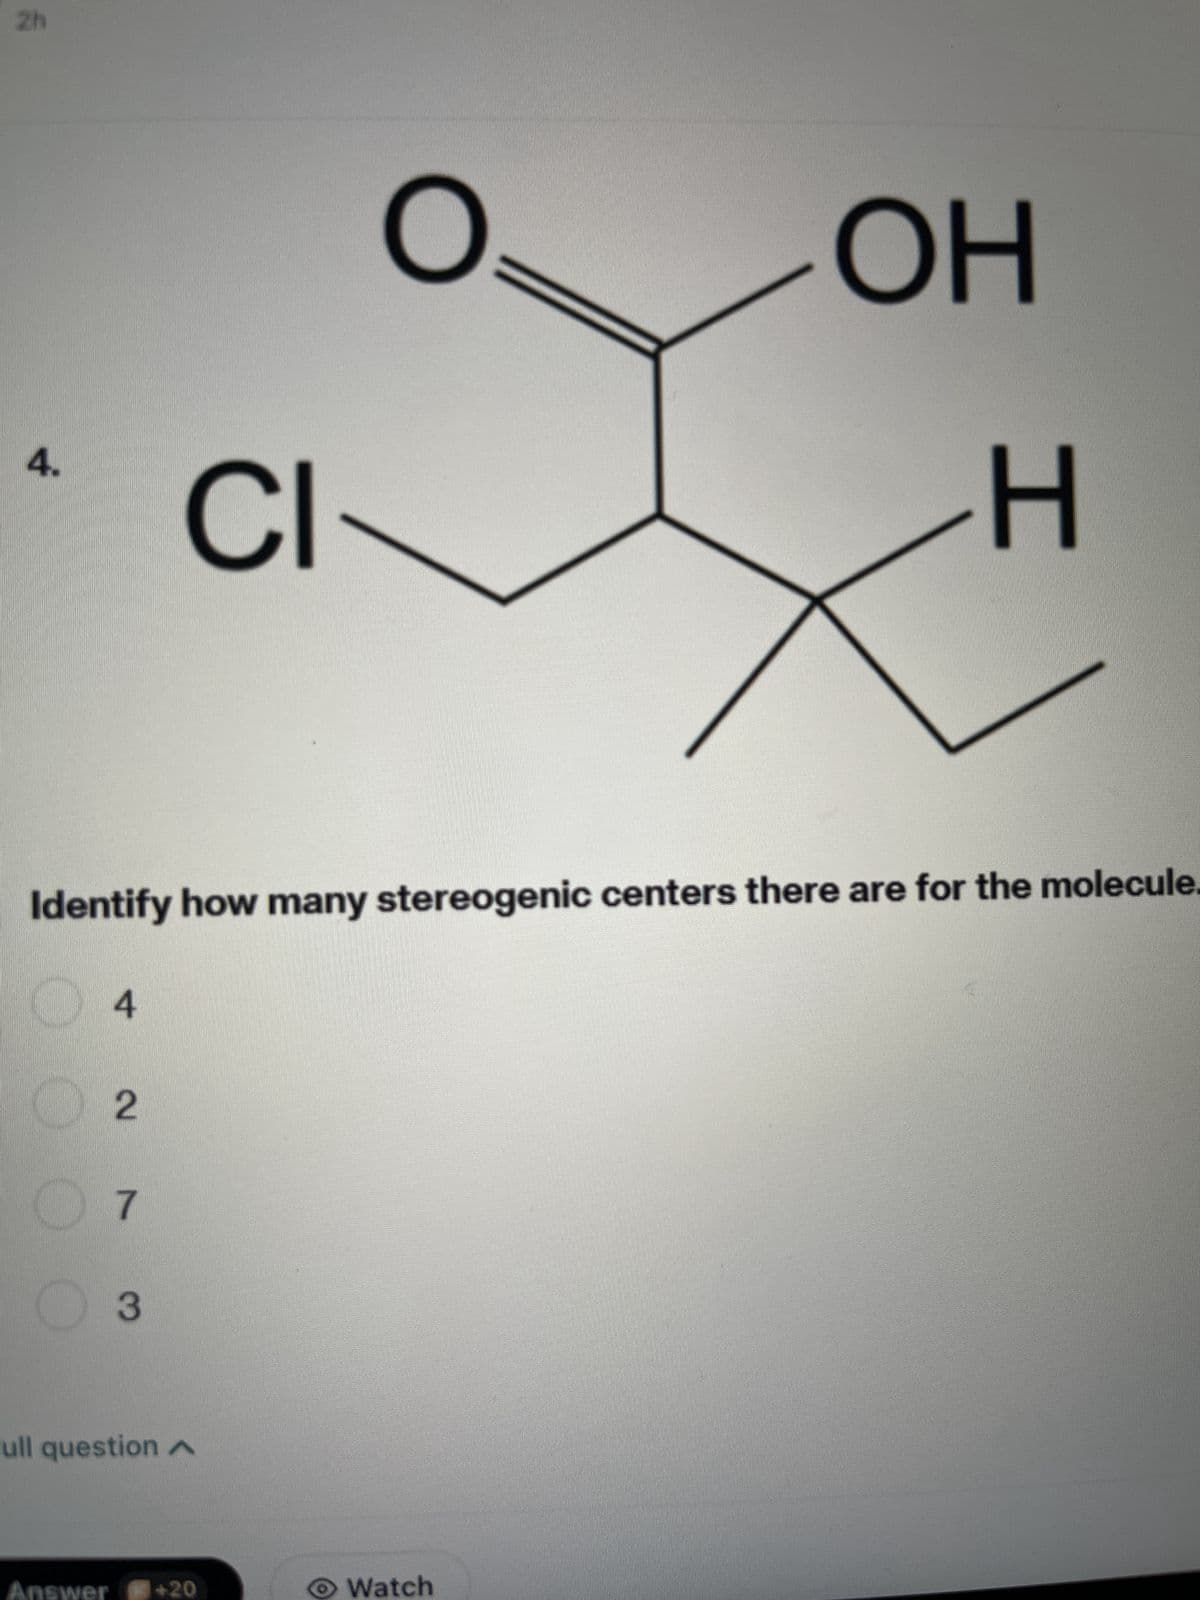 Zh
4.
4
Answer
2
Identify how many stereogenic centers there are for the molecule.
7
CI
3
ull question A
O
+20
ОН
Watch
H